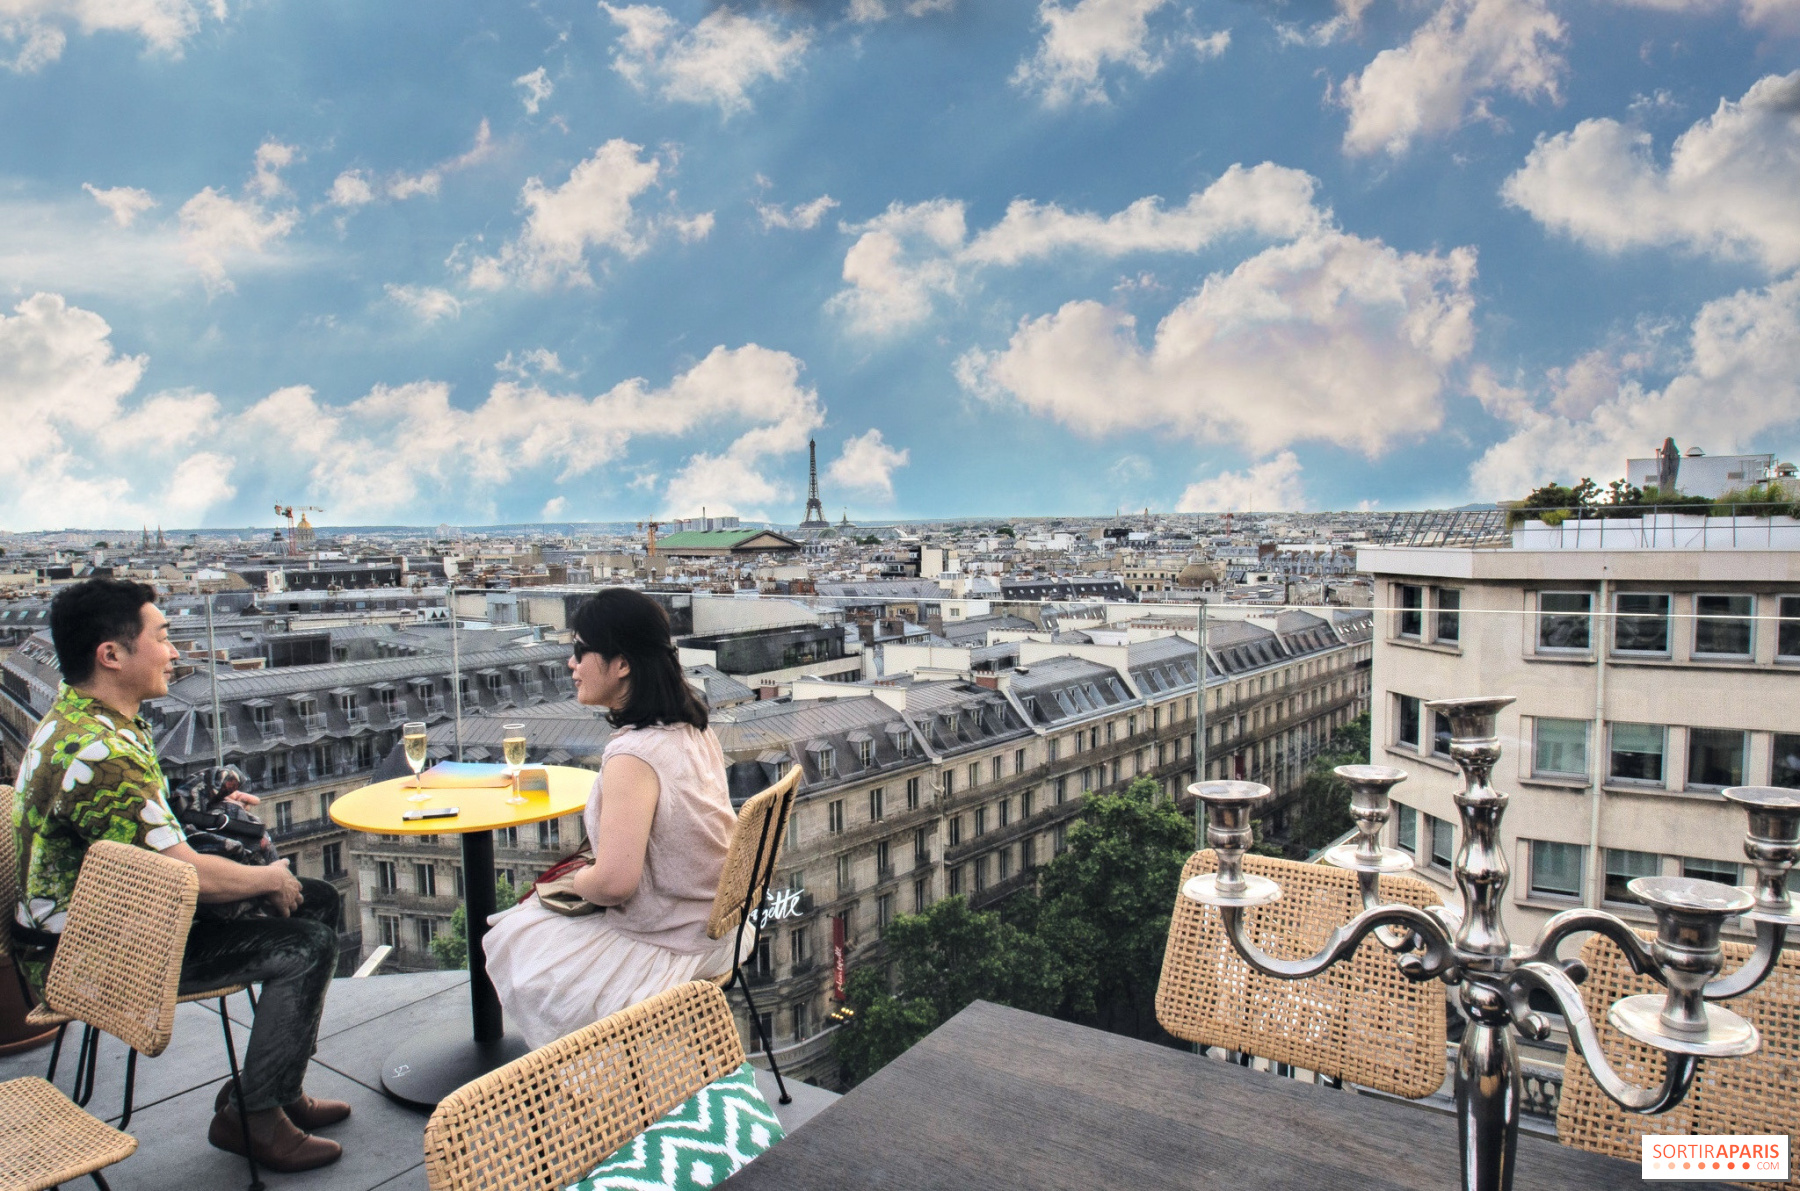 The Rooftop at the Galeries Lafayette Department Store with the